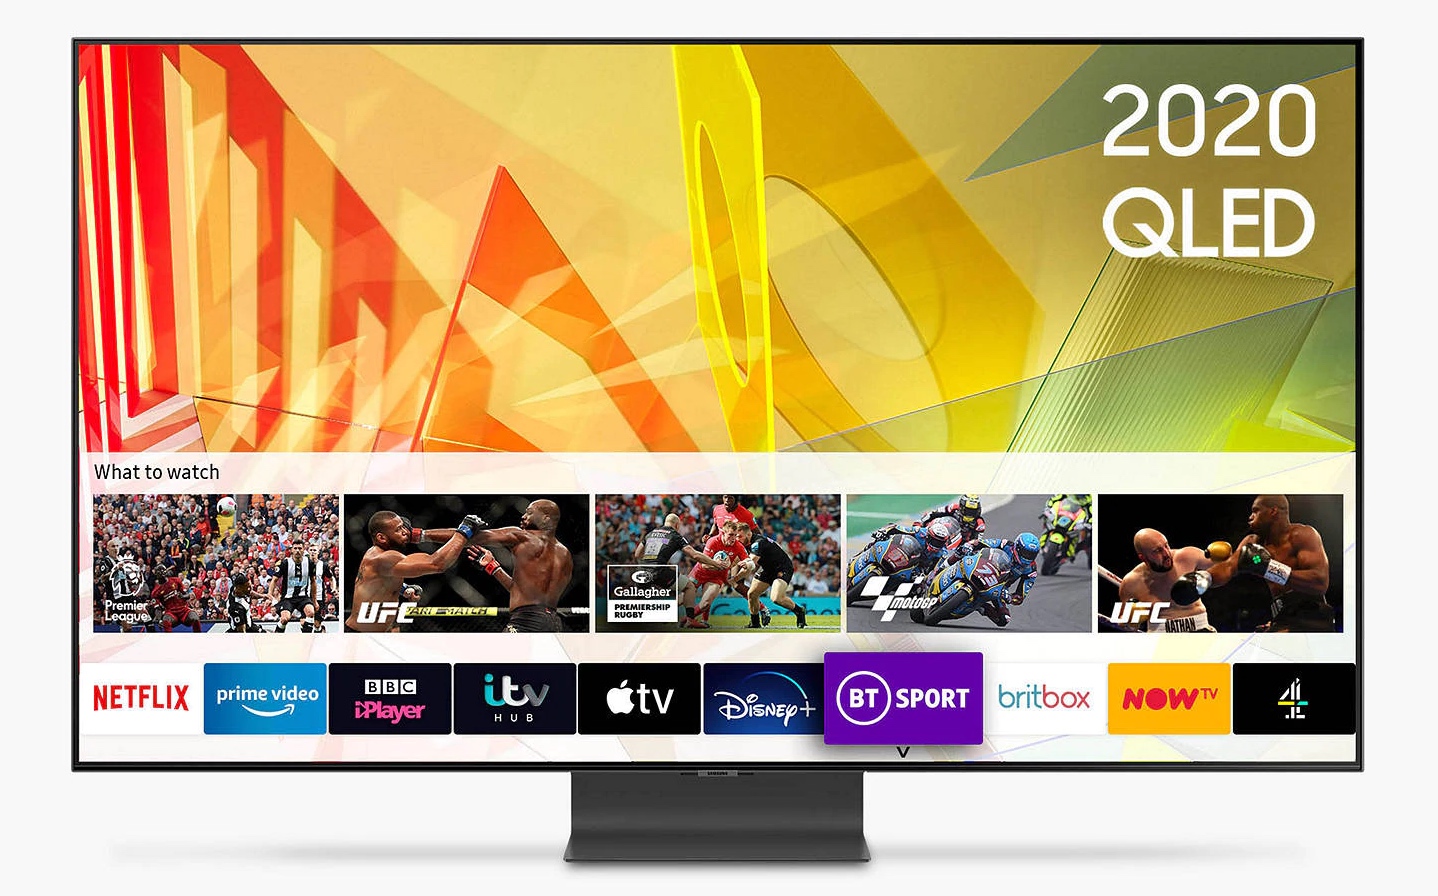 The Samsung Q95T QLED TV offers a brighter picture with excellent black levels for just a few hundred more...